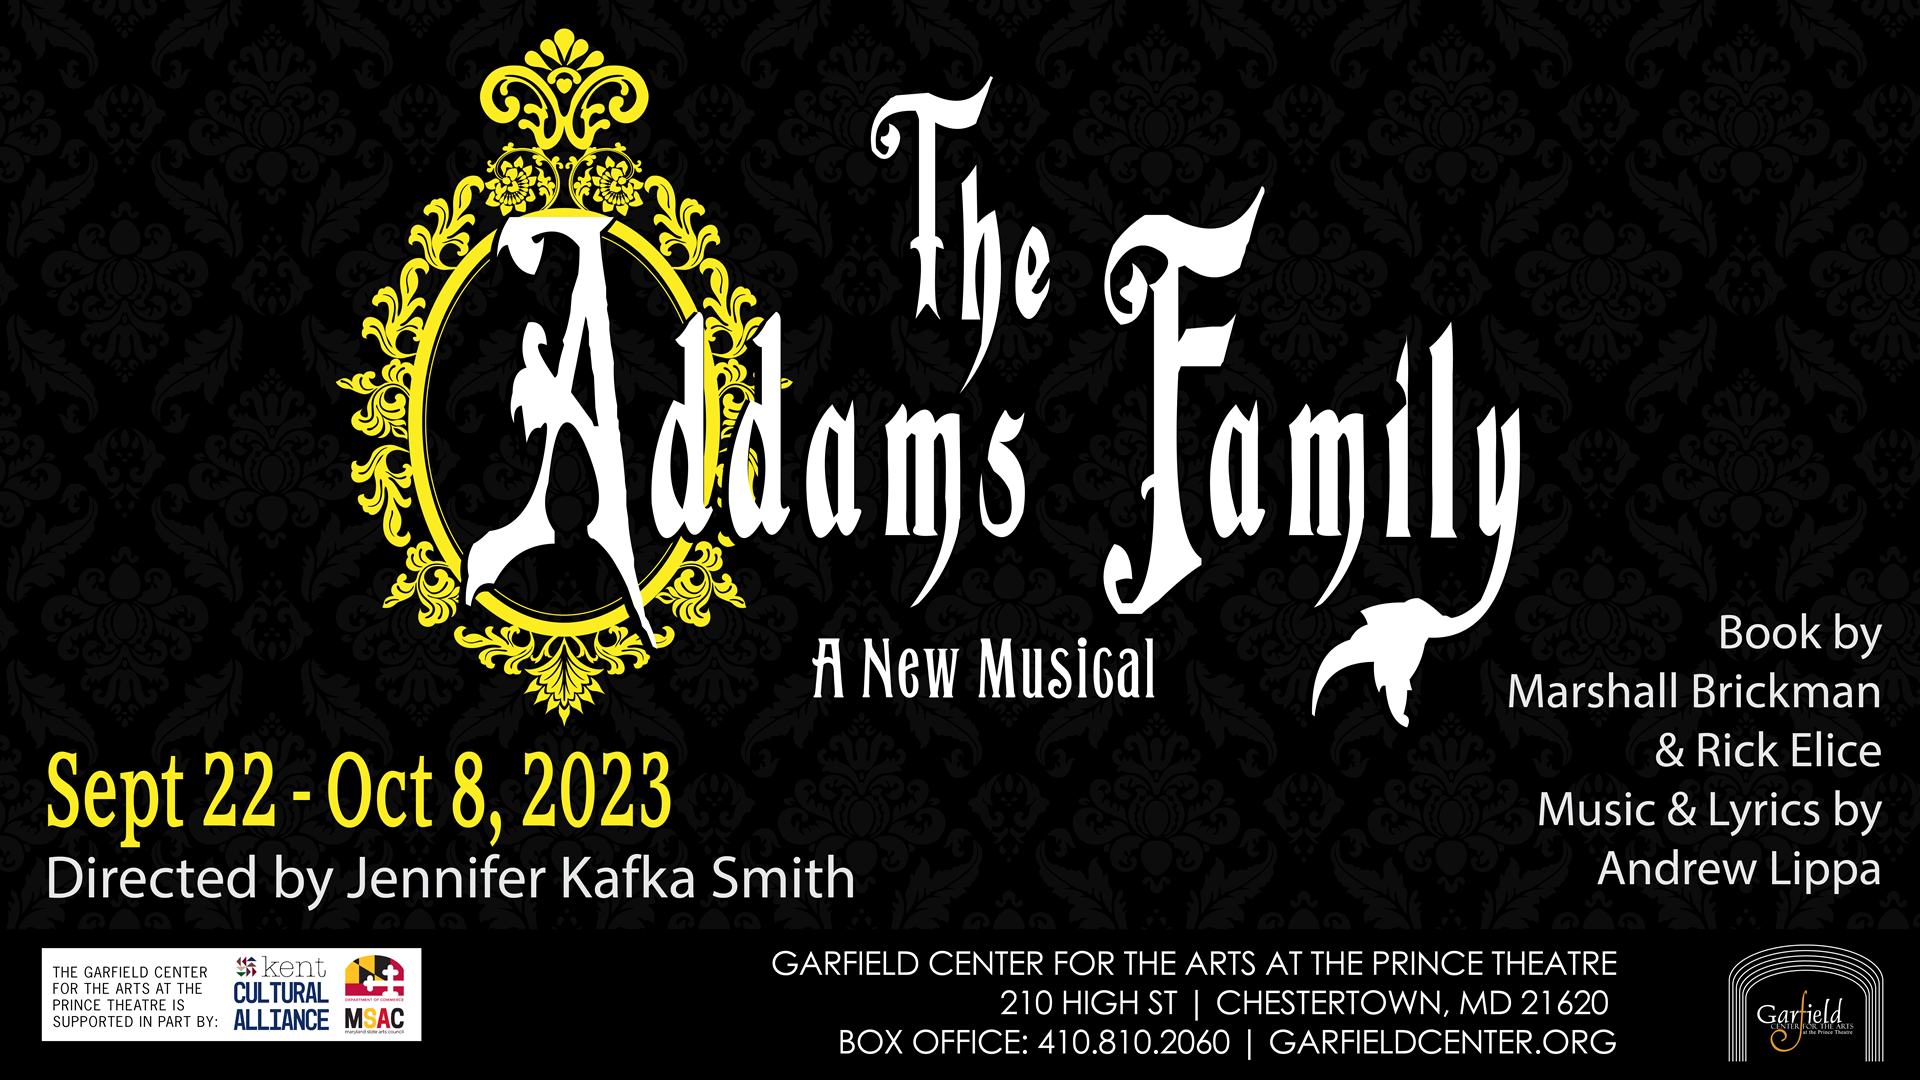 The Garfield presents The Addams Family